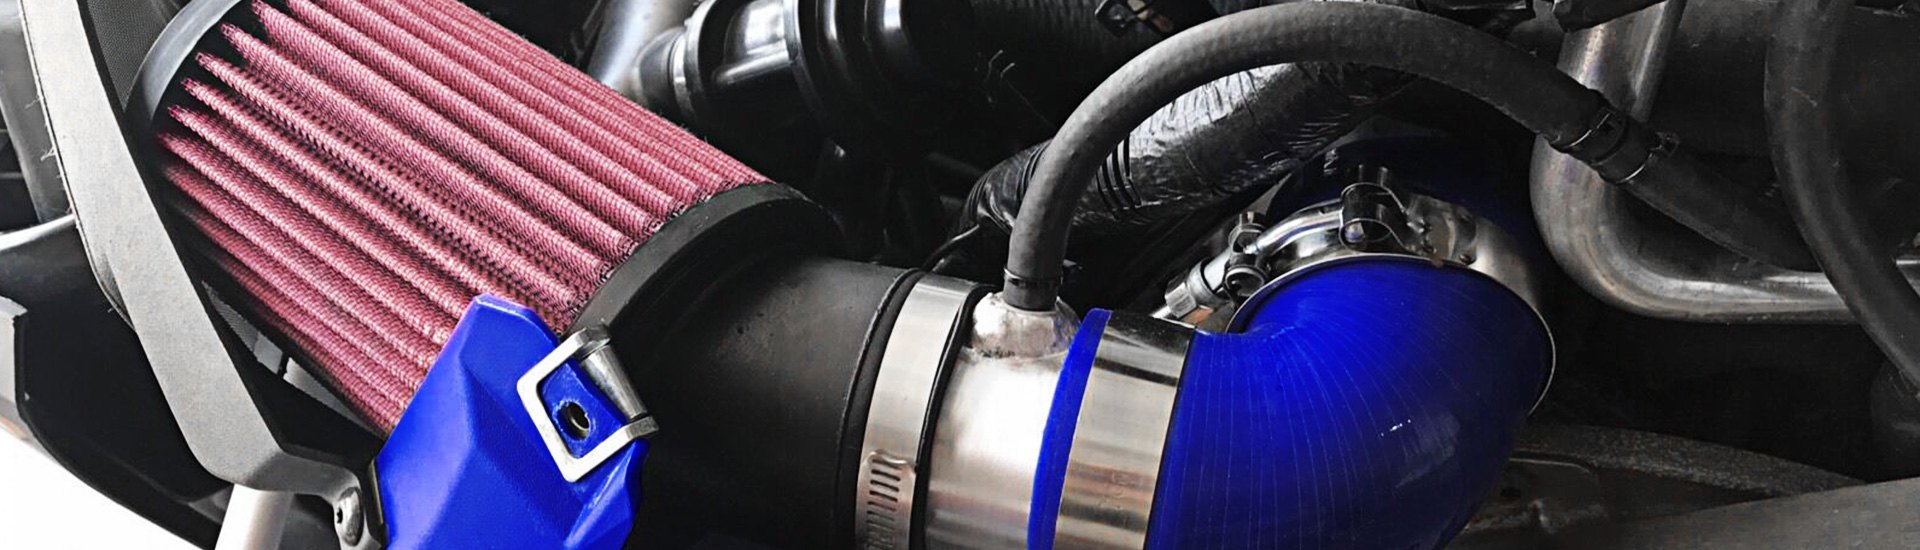 Powersports Air Intakes & Filters